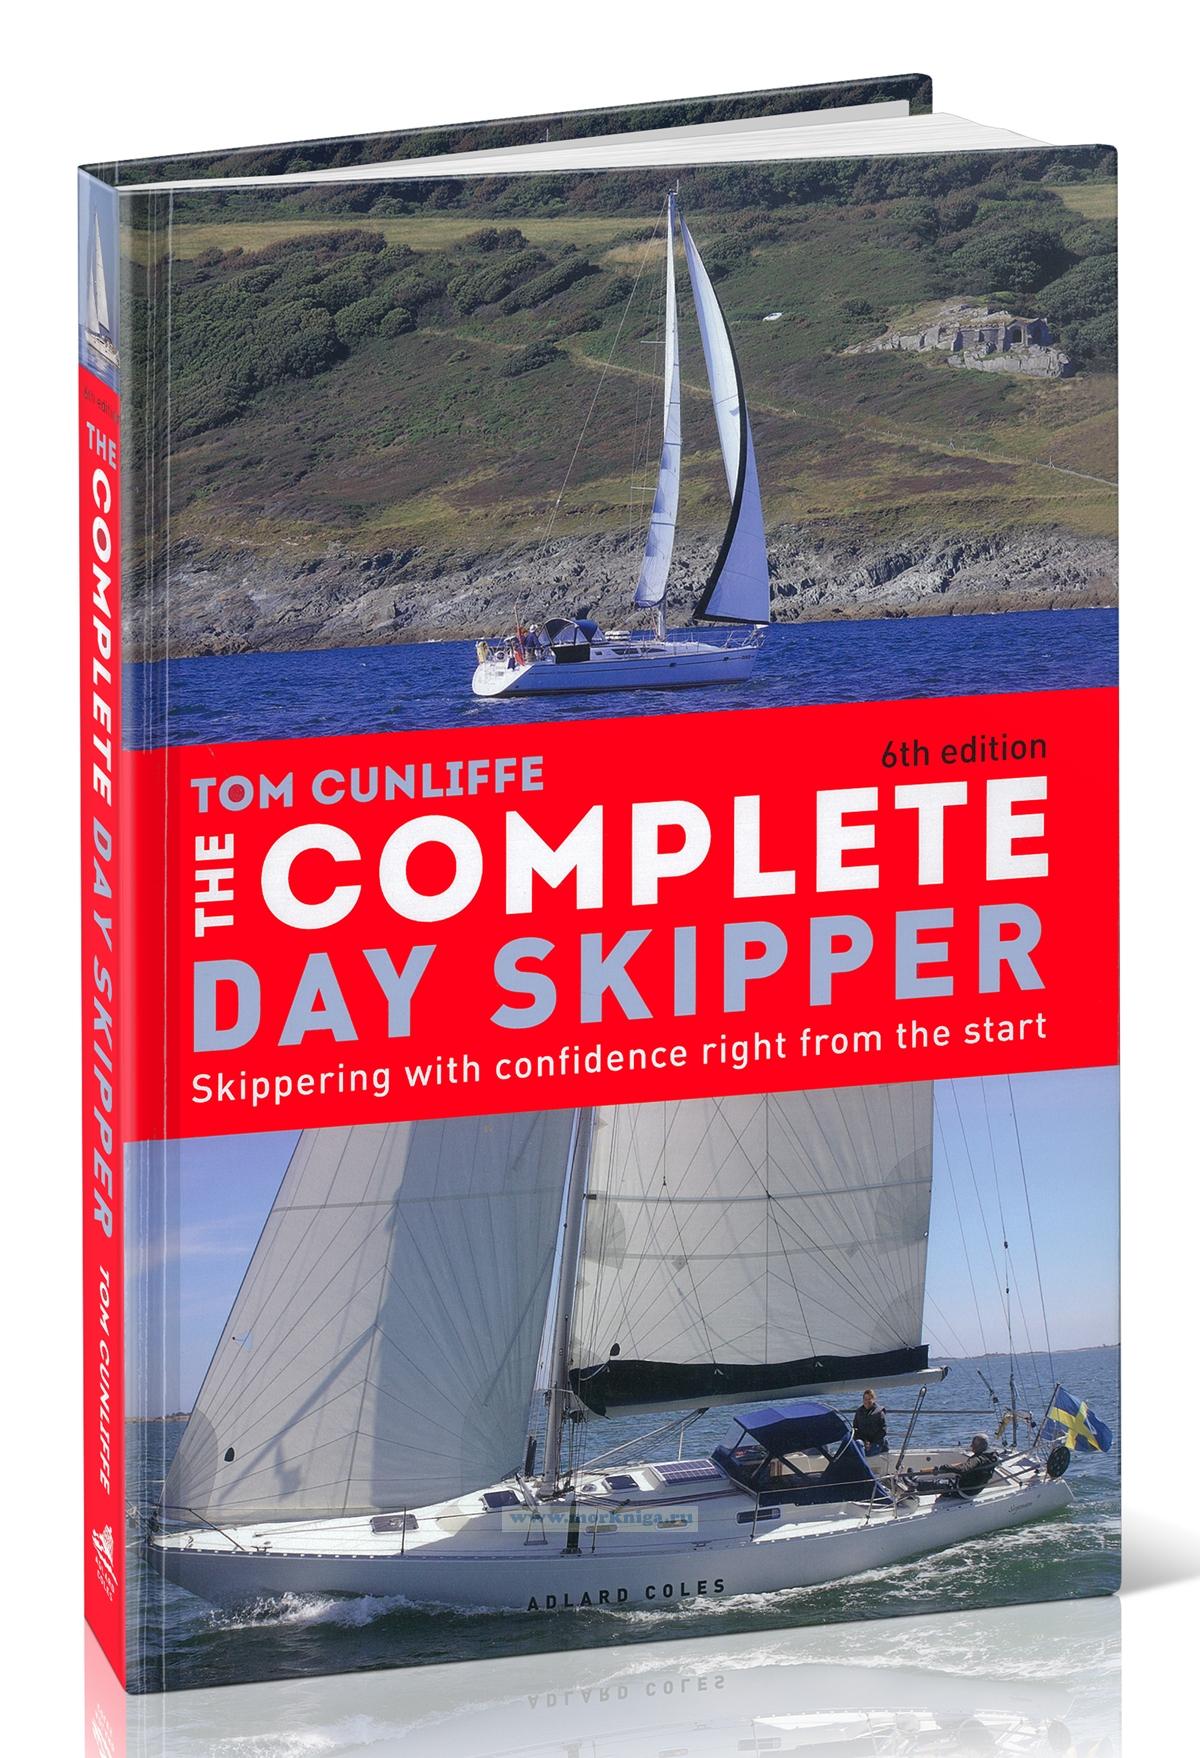 The Complete Day Skipper. 6th edition